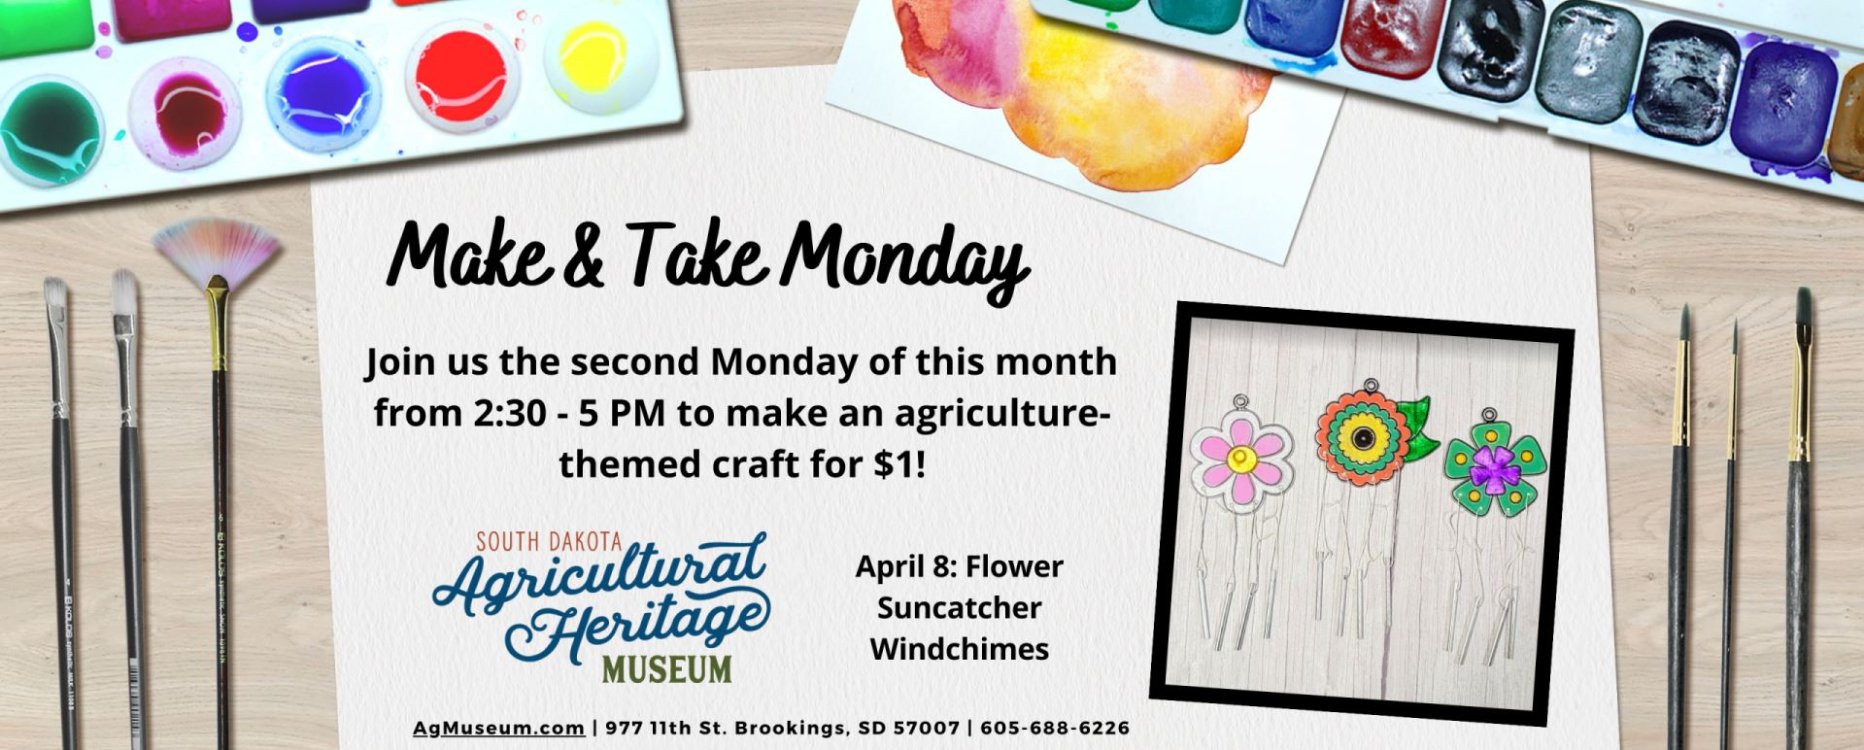 Join us on March 11 from 2:30 - 5:00 PM for Make & Take Monday!  This month, you can stop by and make a flower suncatcher windchime for $1.